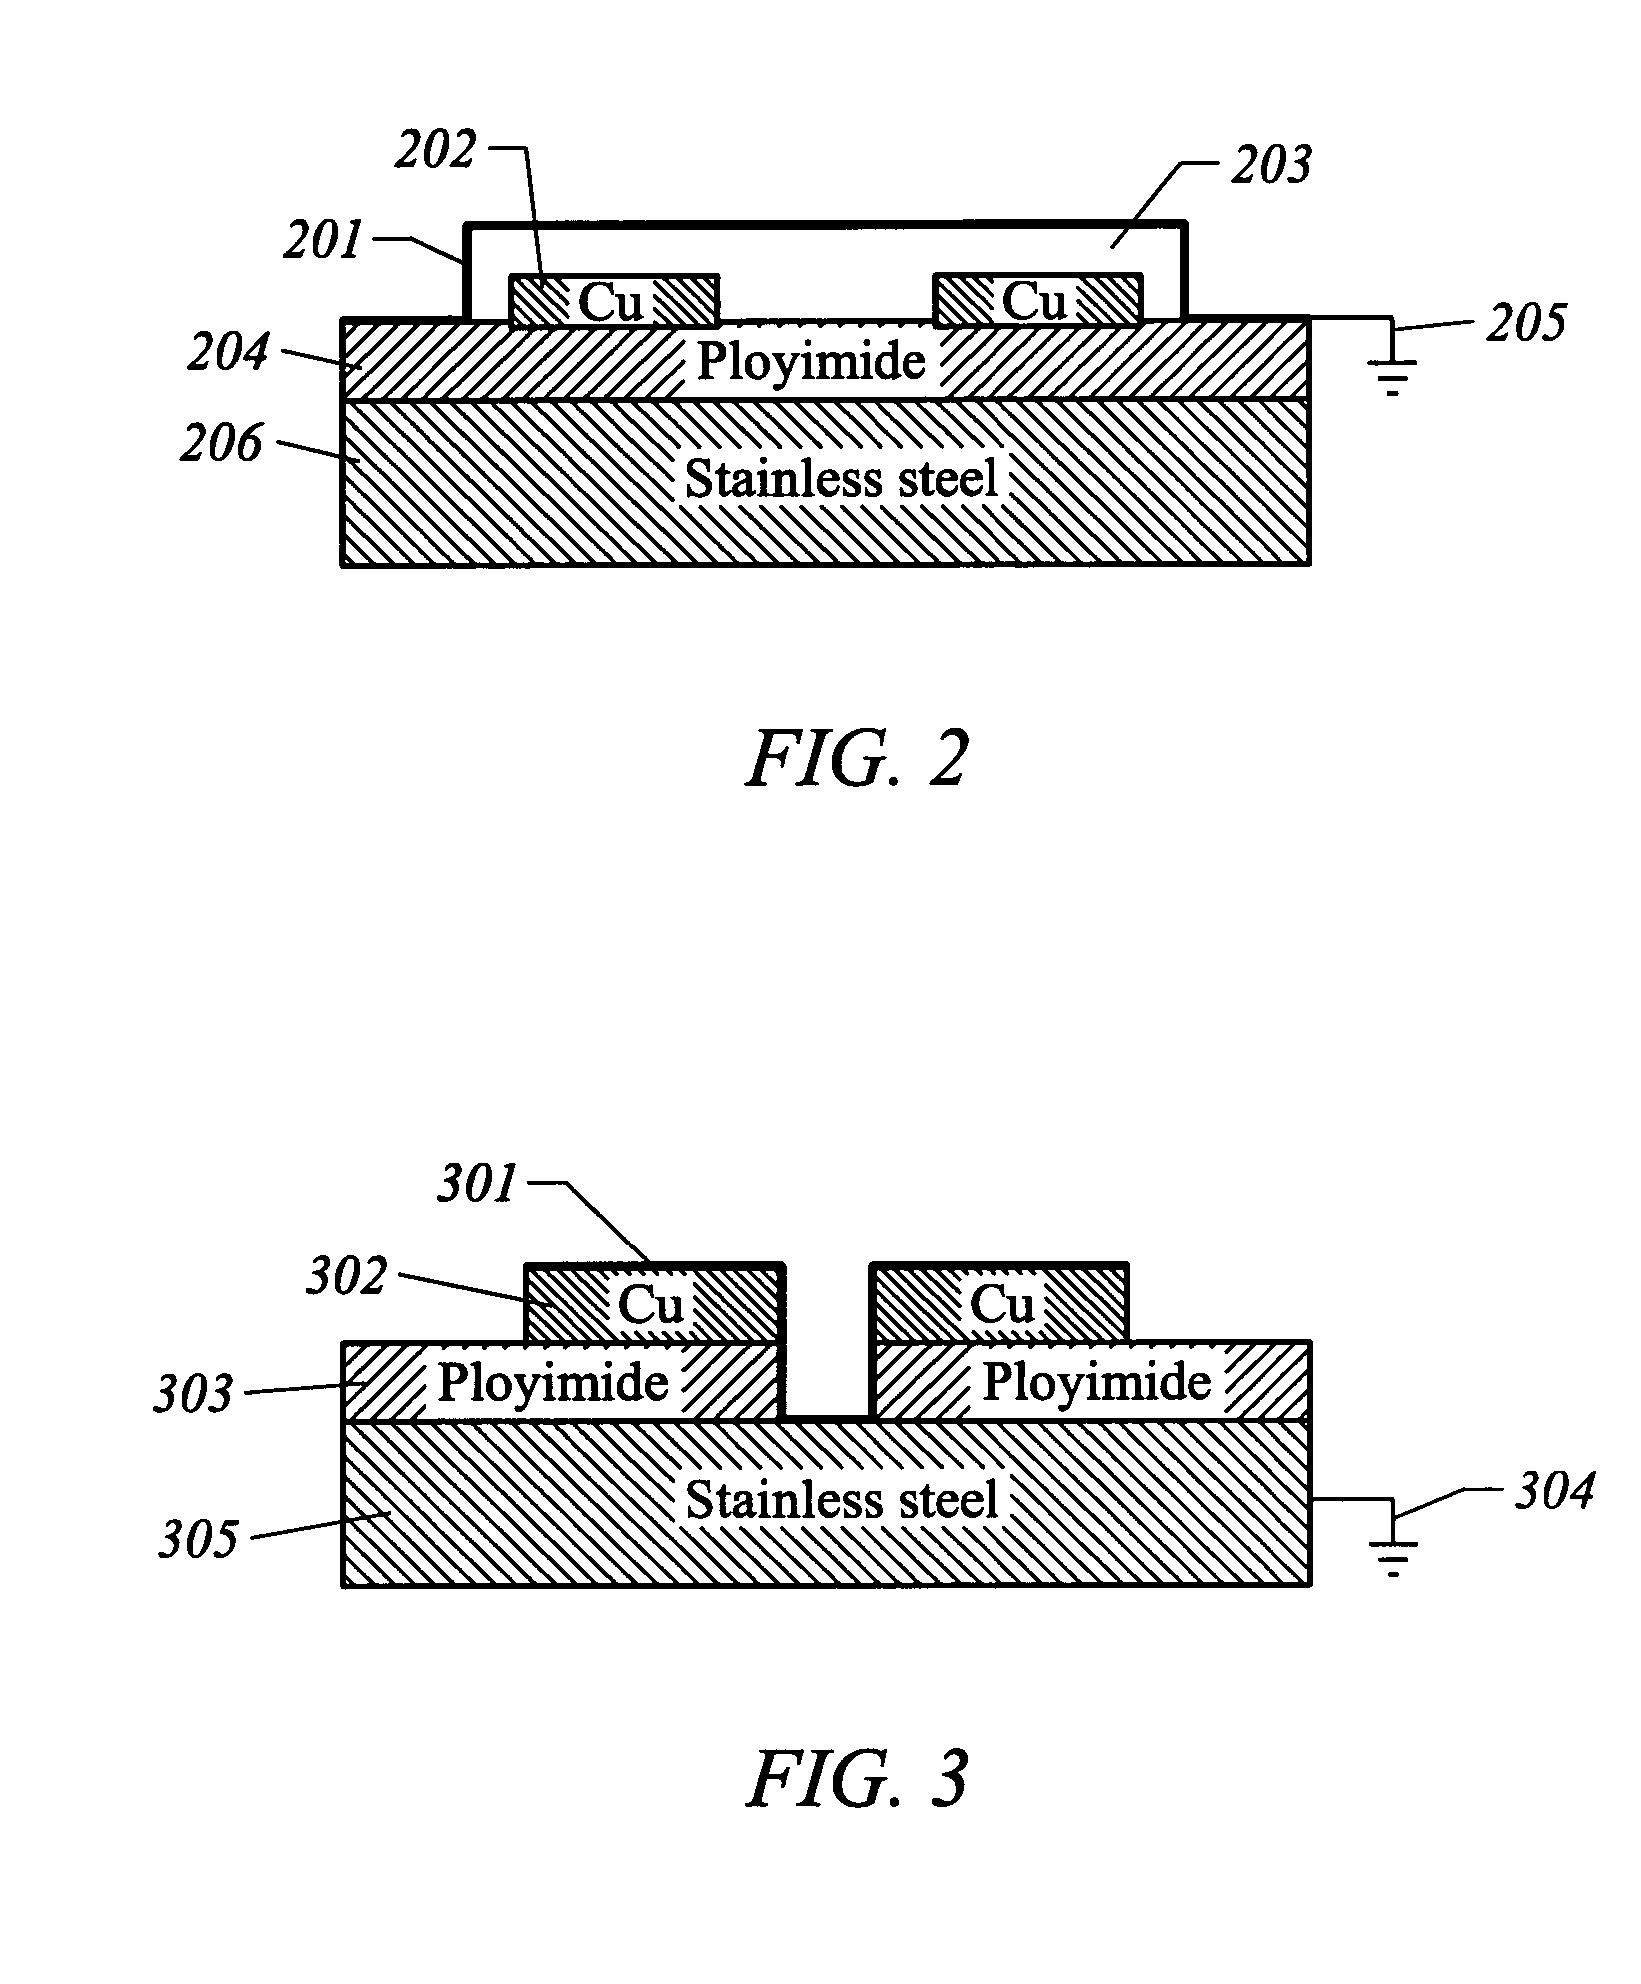 Method to form electrostatic discharge protection on flexible circuits